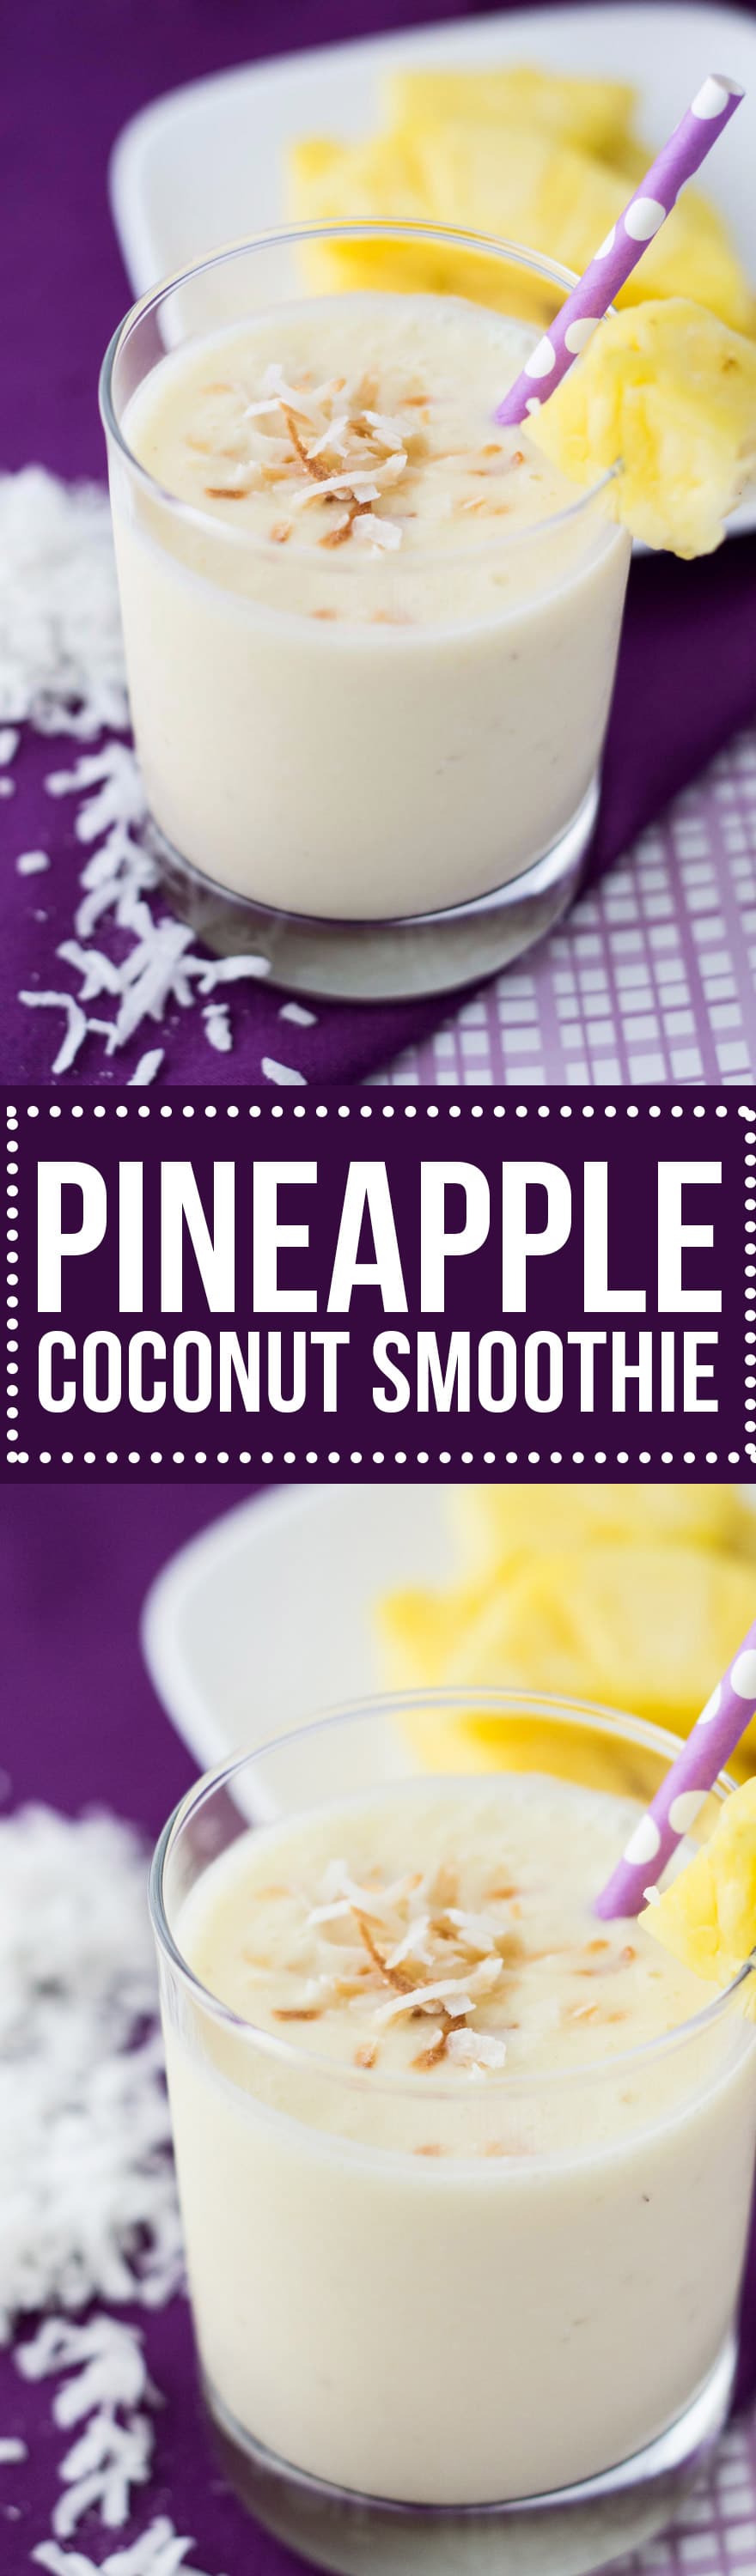 This creamy, dreamy Pineapple Coconut Smoothie will become your go-to smoothie recipe when the weather's hot. It's so smooth and refreshing!